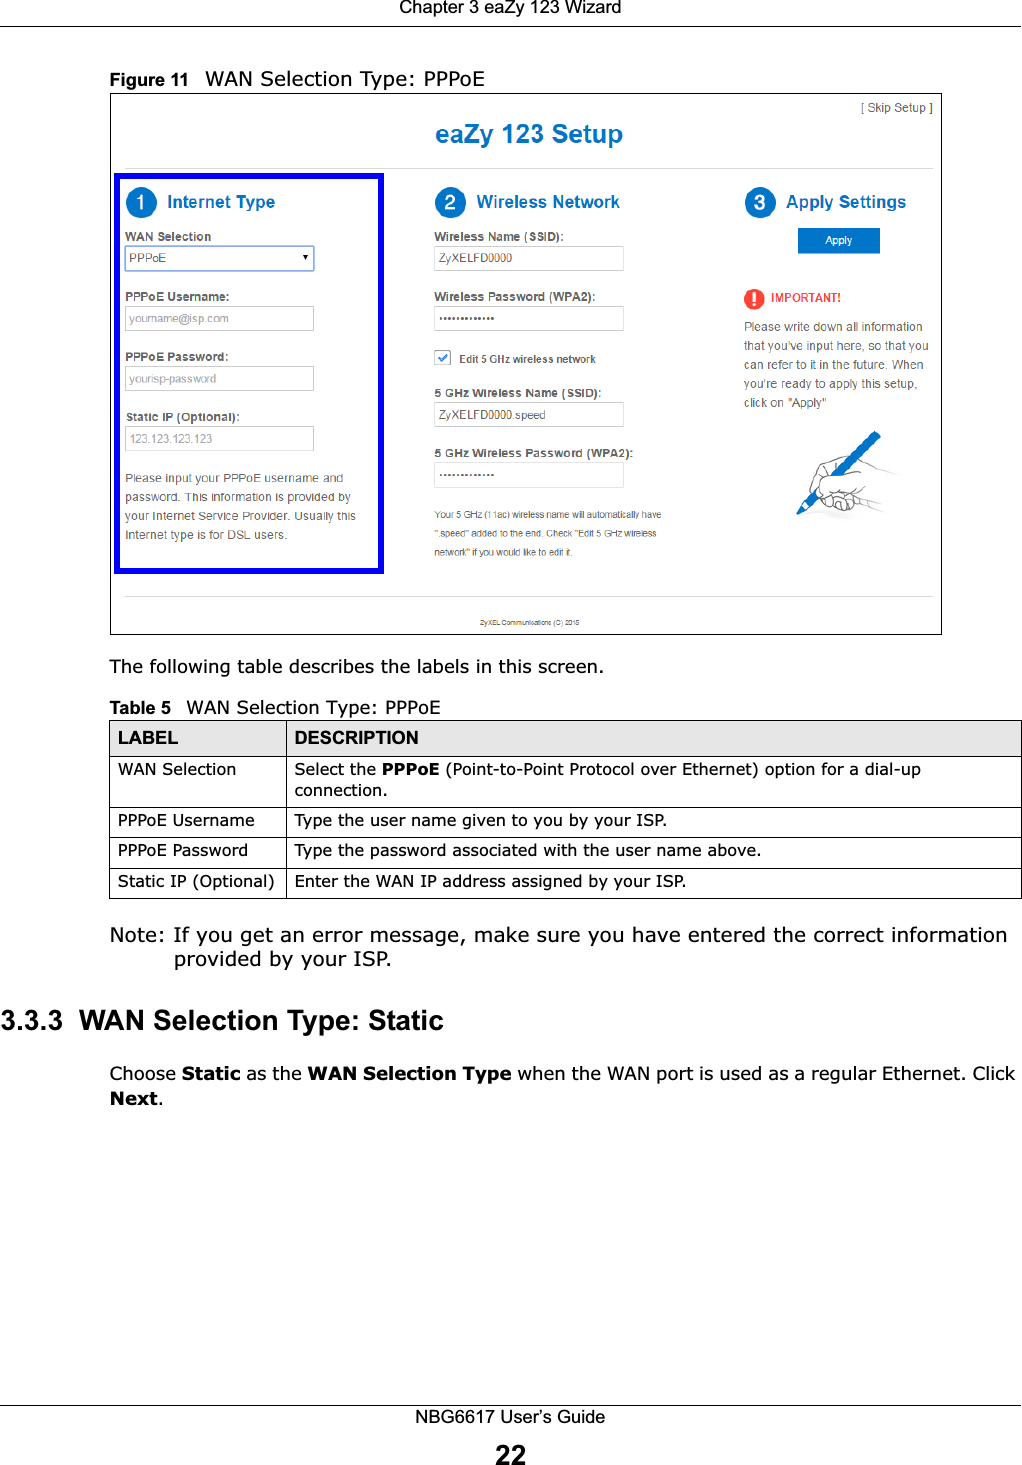 Chapter 3 eaZy 123 WizardNBG6617 User’s Guide22Figure 11   WAN Selection Type: PPPoE The following table describes the labels in this screen.Note: If you get an error message, make sure you have entered the correct information provided by your ISP. 3.3.3  WAN Selection Type: StaticChoose Static as the WAN Selection Type when the WAN port is used as a regular Ethernet. Click Next.Table 5   WAN Selection Type: PPPoELABEL DESCRIPTIONWAN Selection Select the PPPoE (Point-to-Point Protocol over Ethernet) option for a dial-up connection.PPPoE Username Type the user name given to you by your ISP. PPPoE Password  Type the password associated with the user name above.Static IP (Optional) Enter the WAN IP address assigned by your ISP.